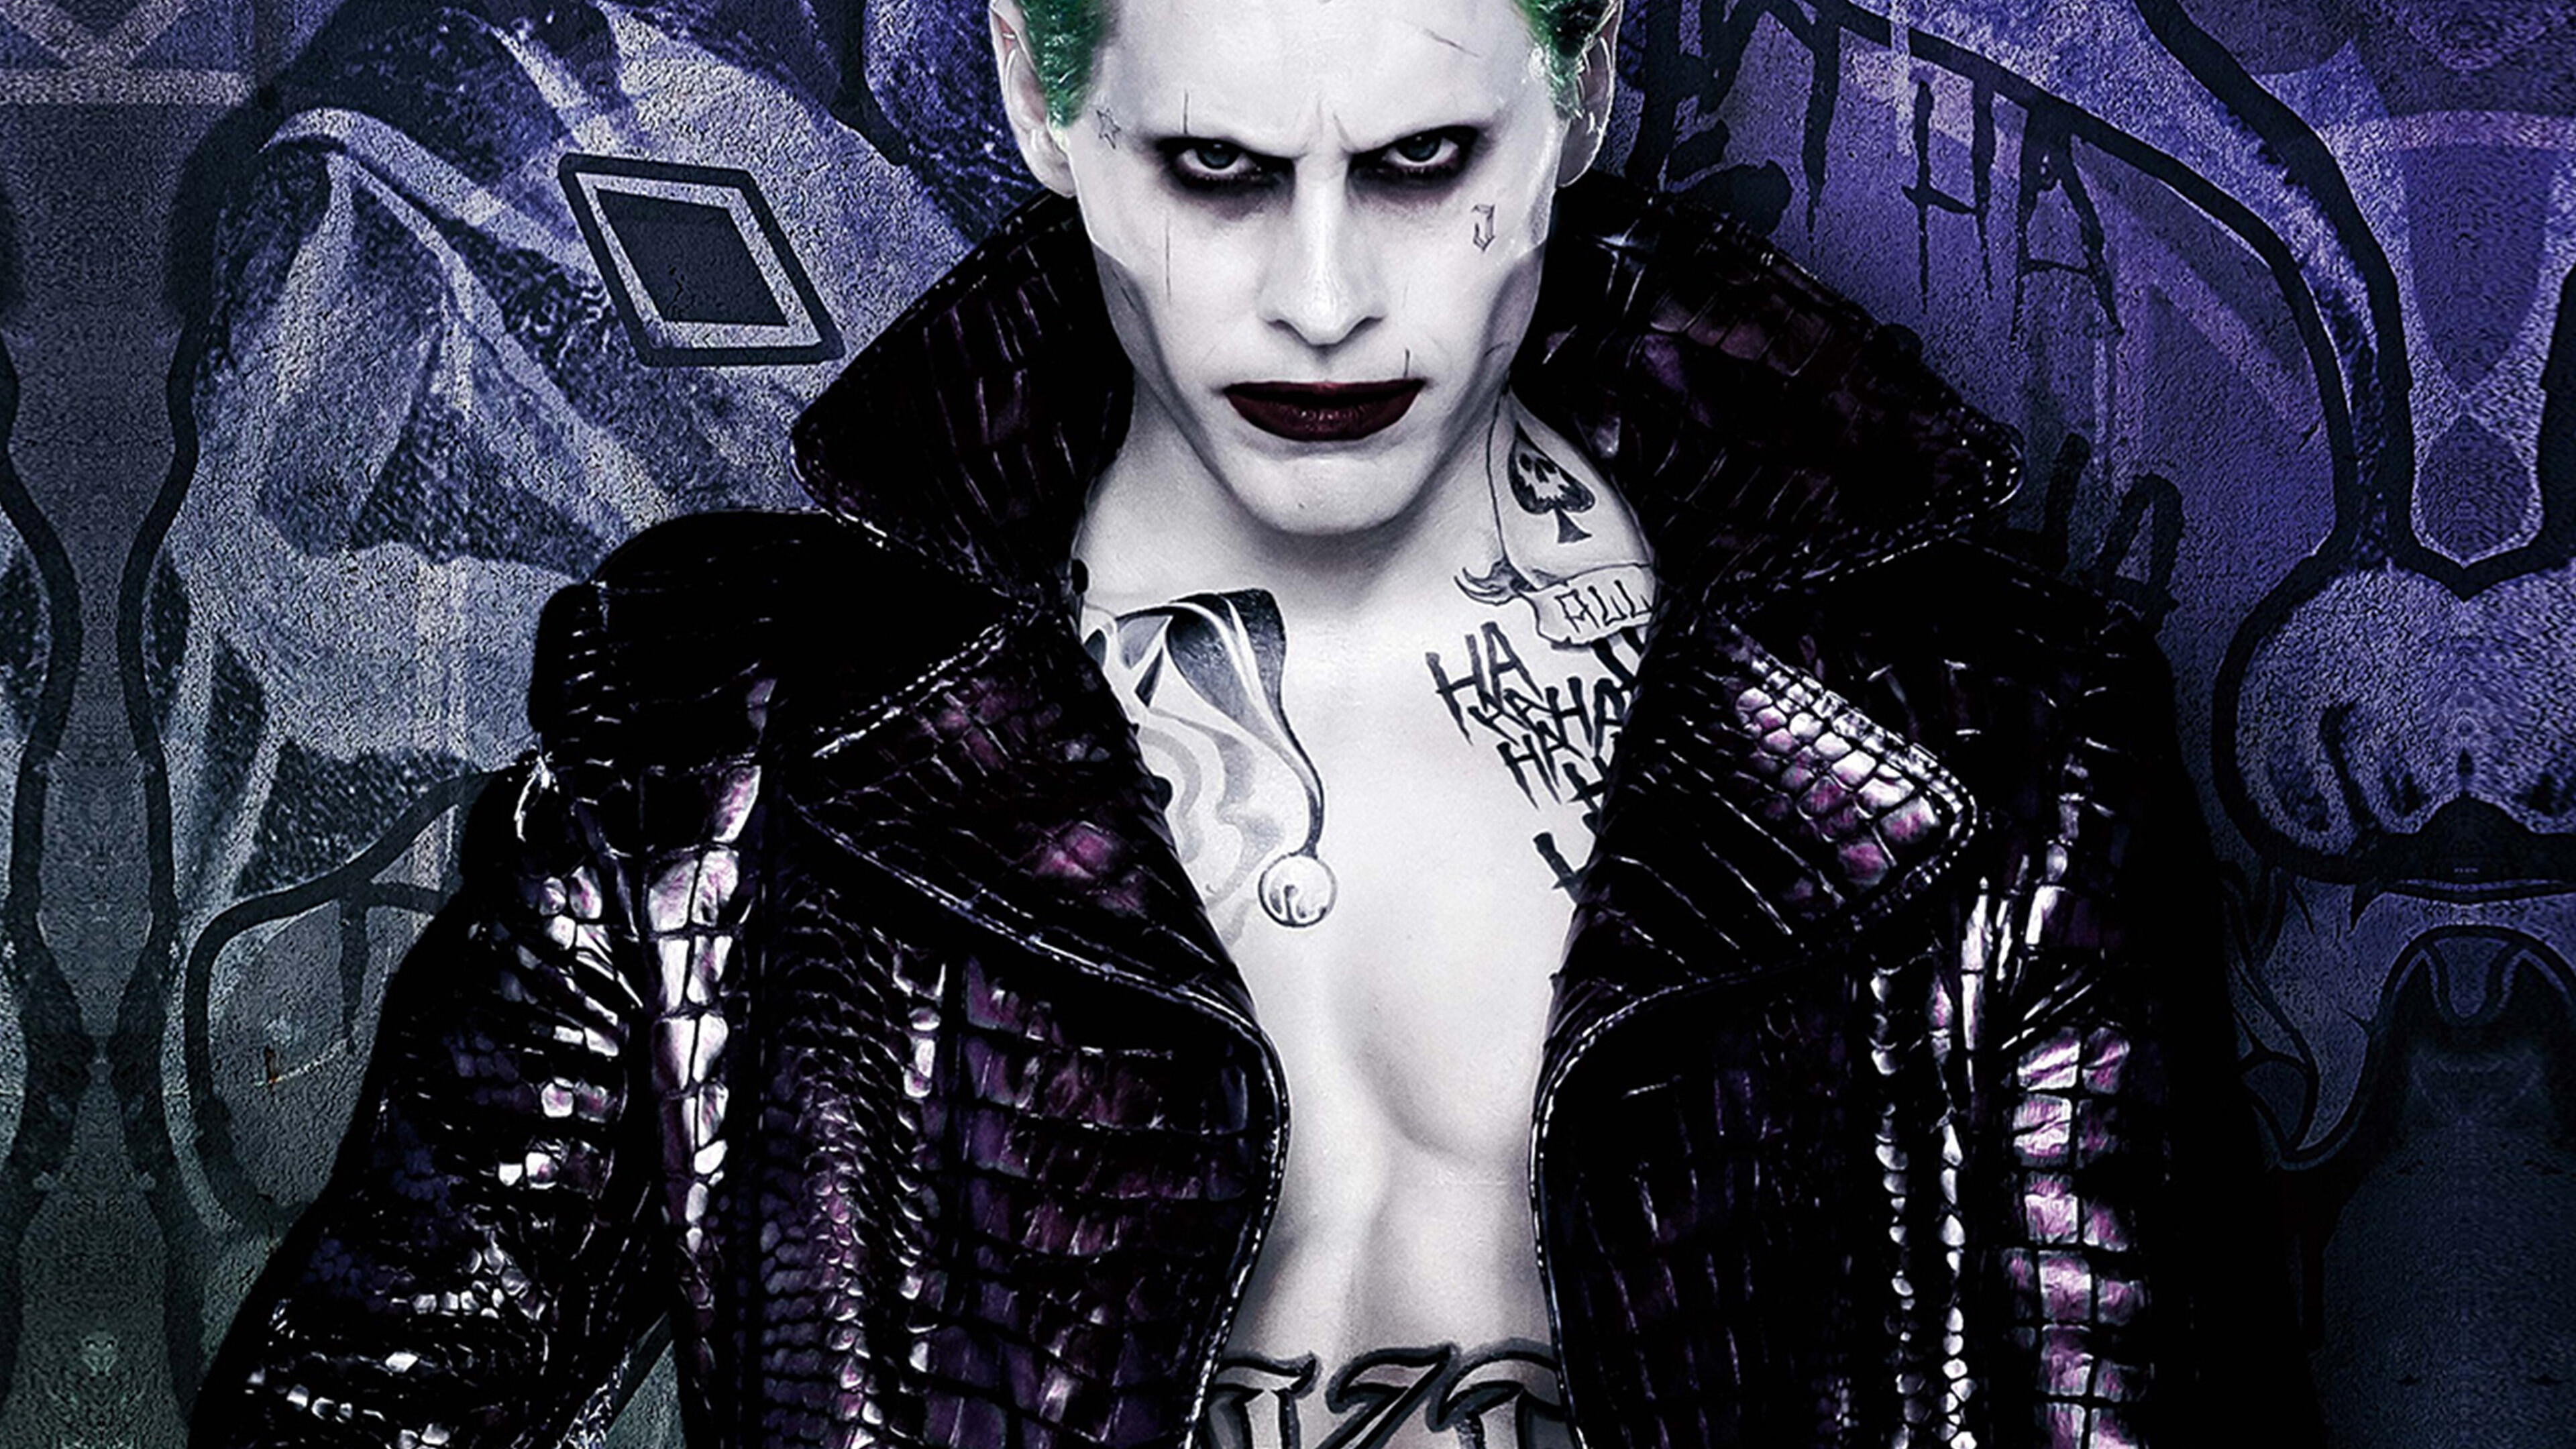 Suicide Squad: Jared Leto as The Joker, A psychopathic crime boss. 3840x2160 4K Background.